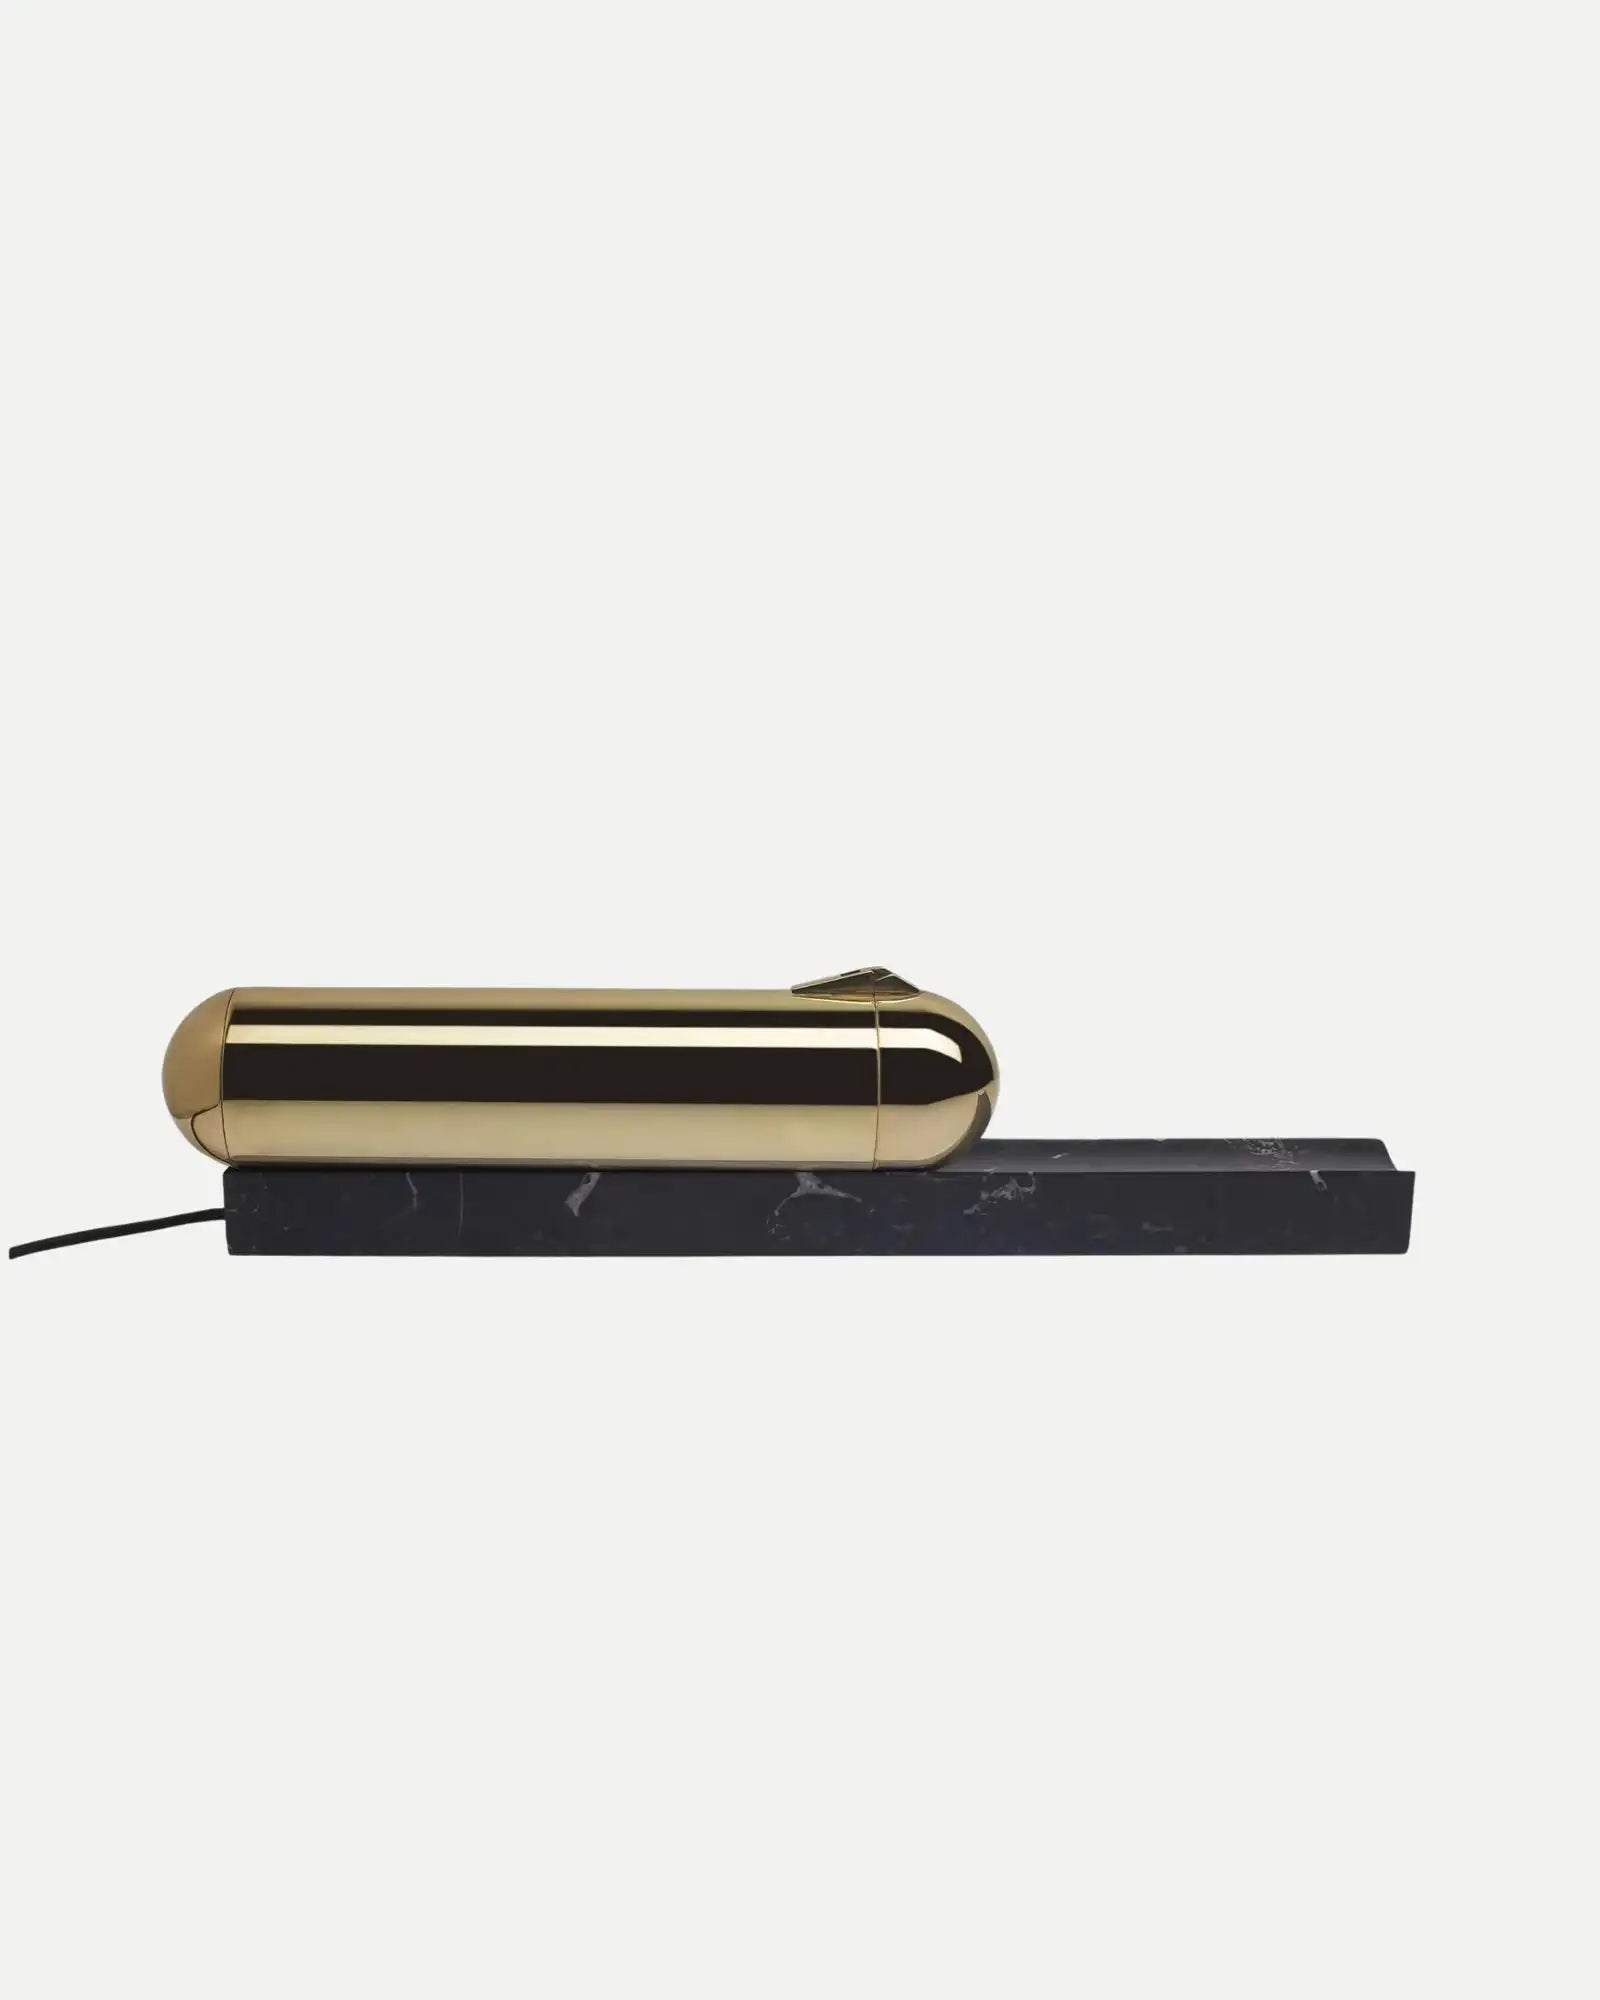 Isp Table Lamp by DCW Editions | Nook Collections